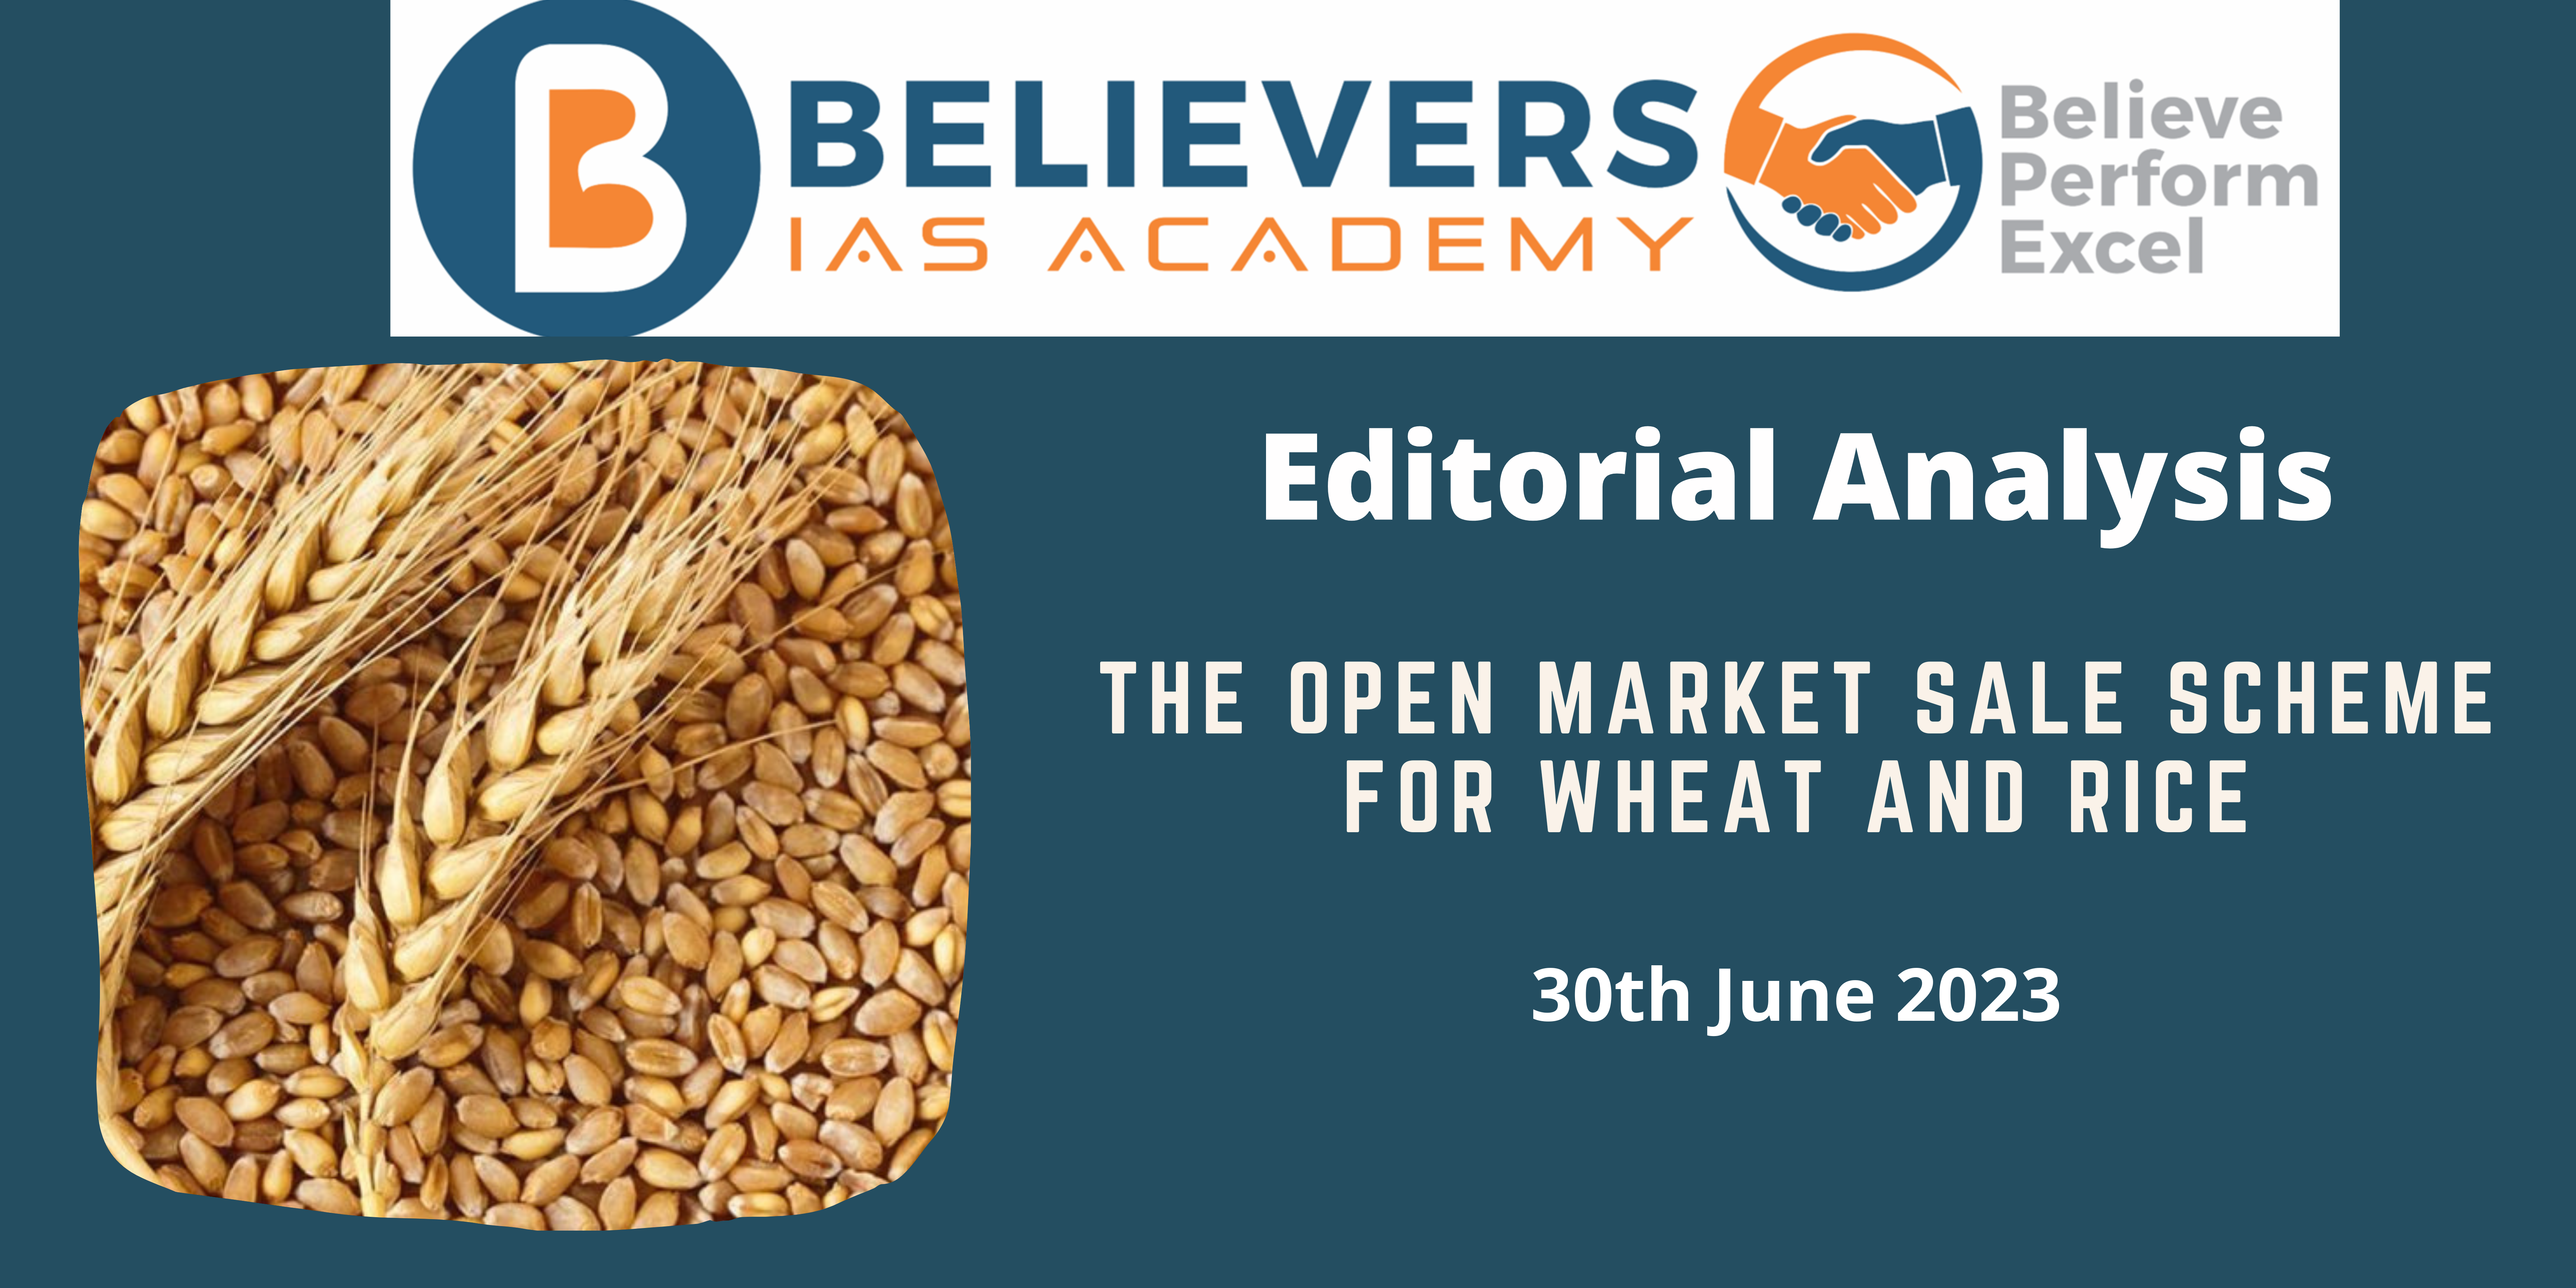 The Open Market Sale Scheme for wheat and rice